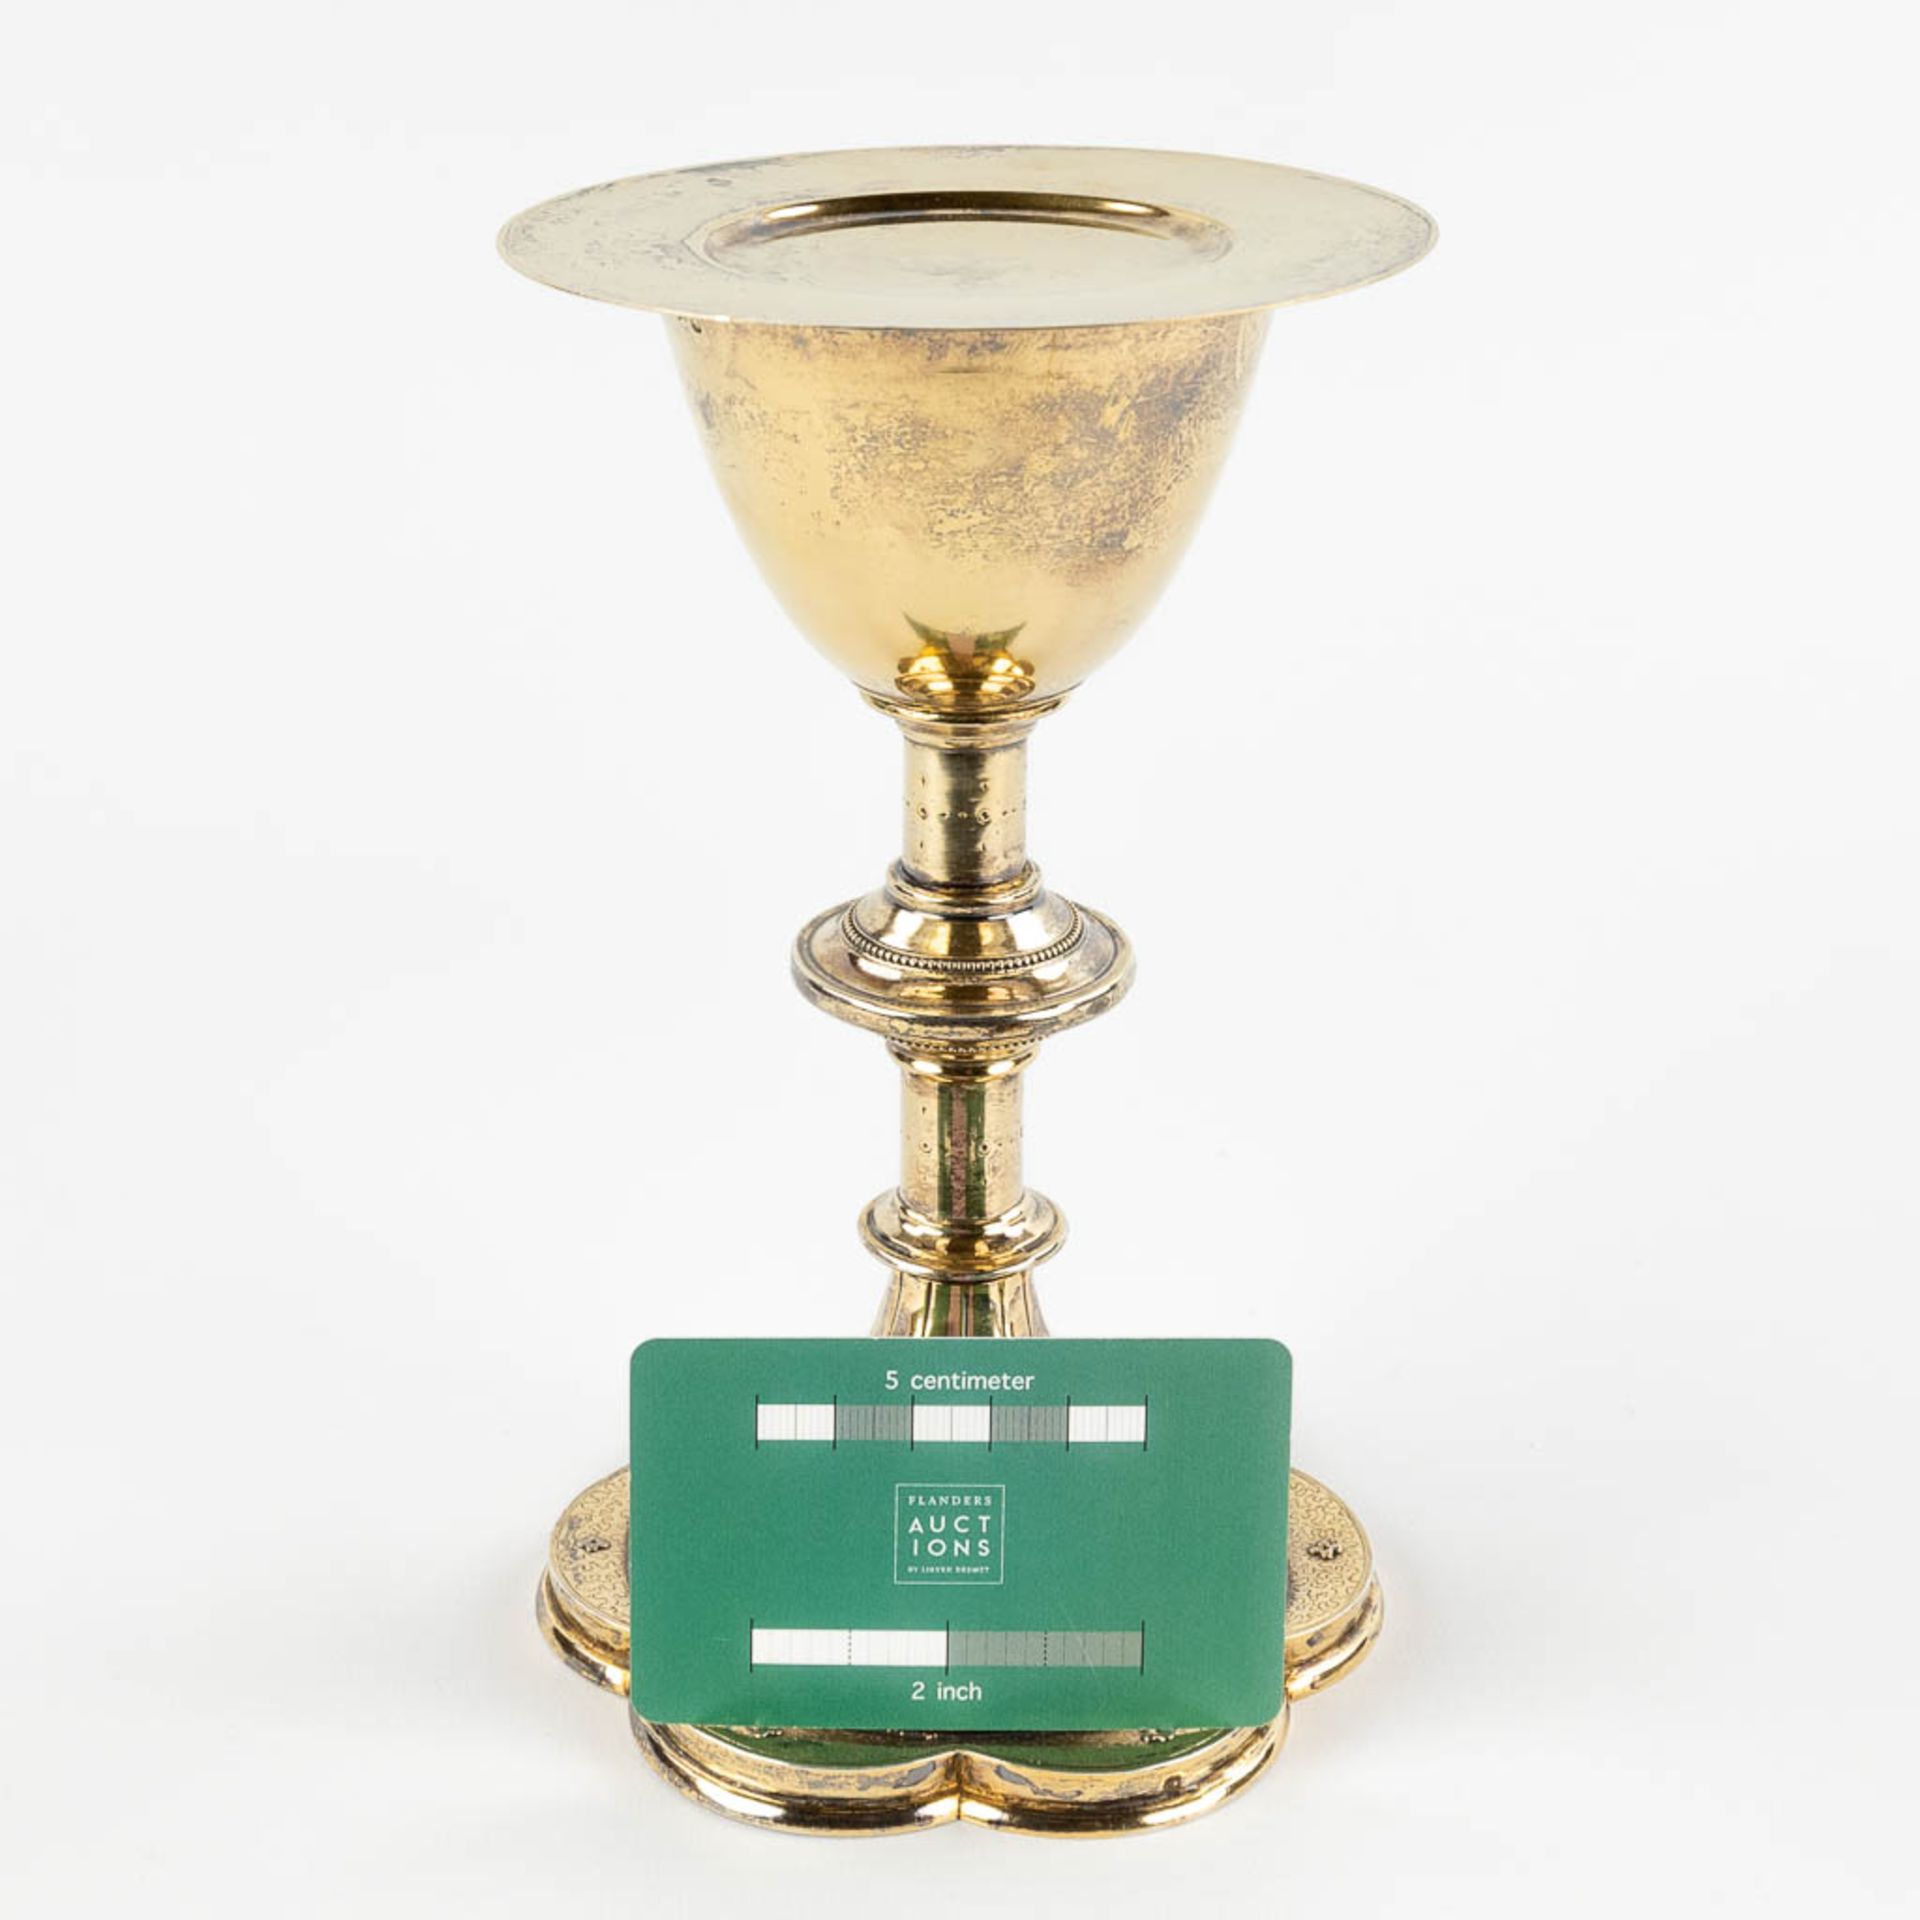 A Chalice with paten, gilt silver in gothic revival style. 305g. (H:19,5 x D:12,5 cm) - Image 2 of 16